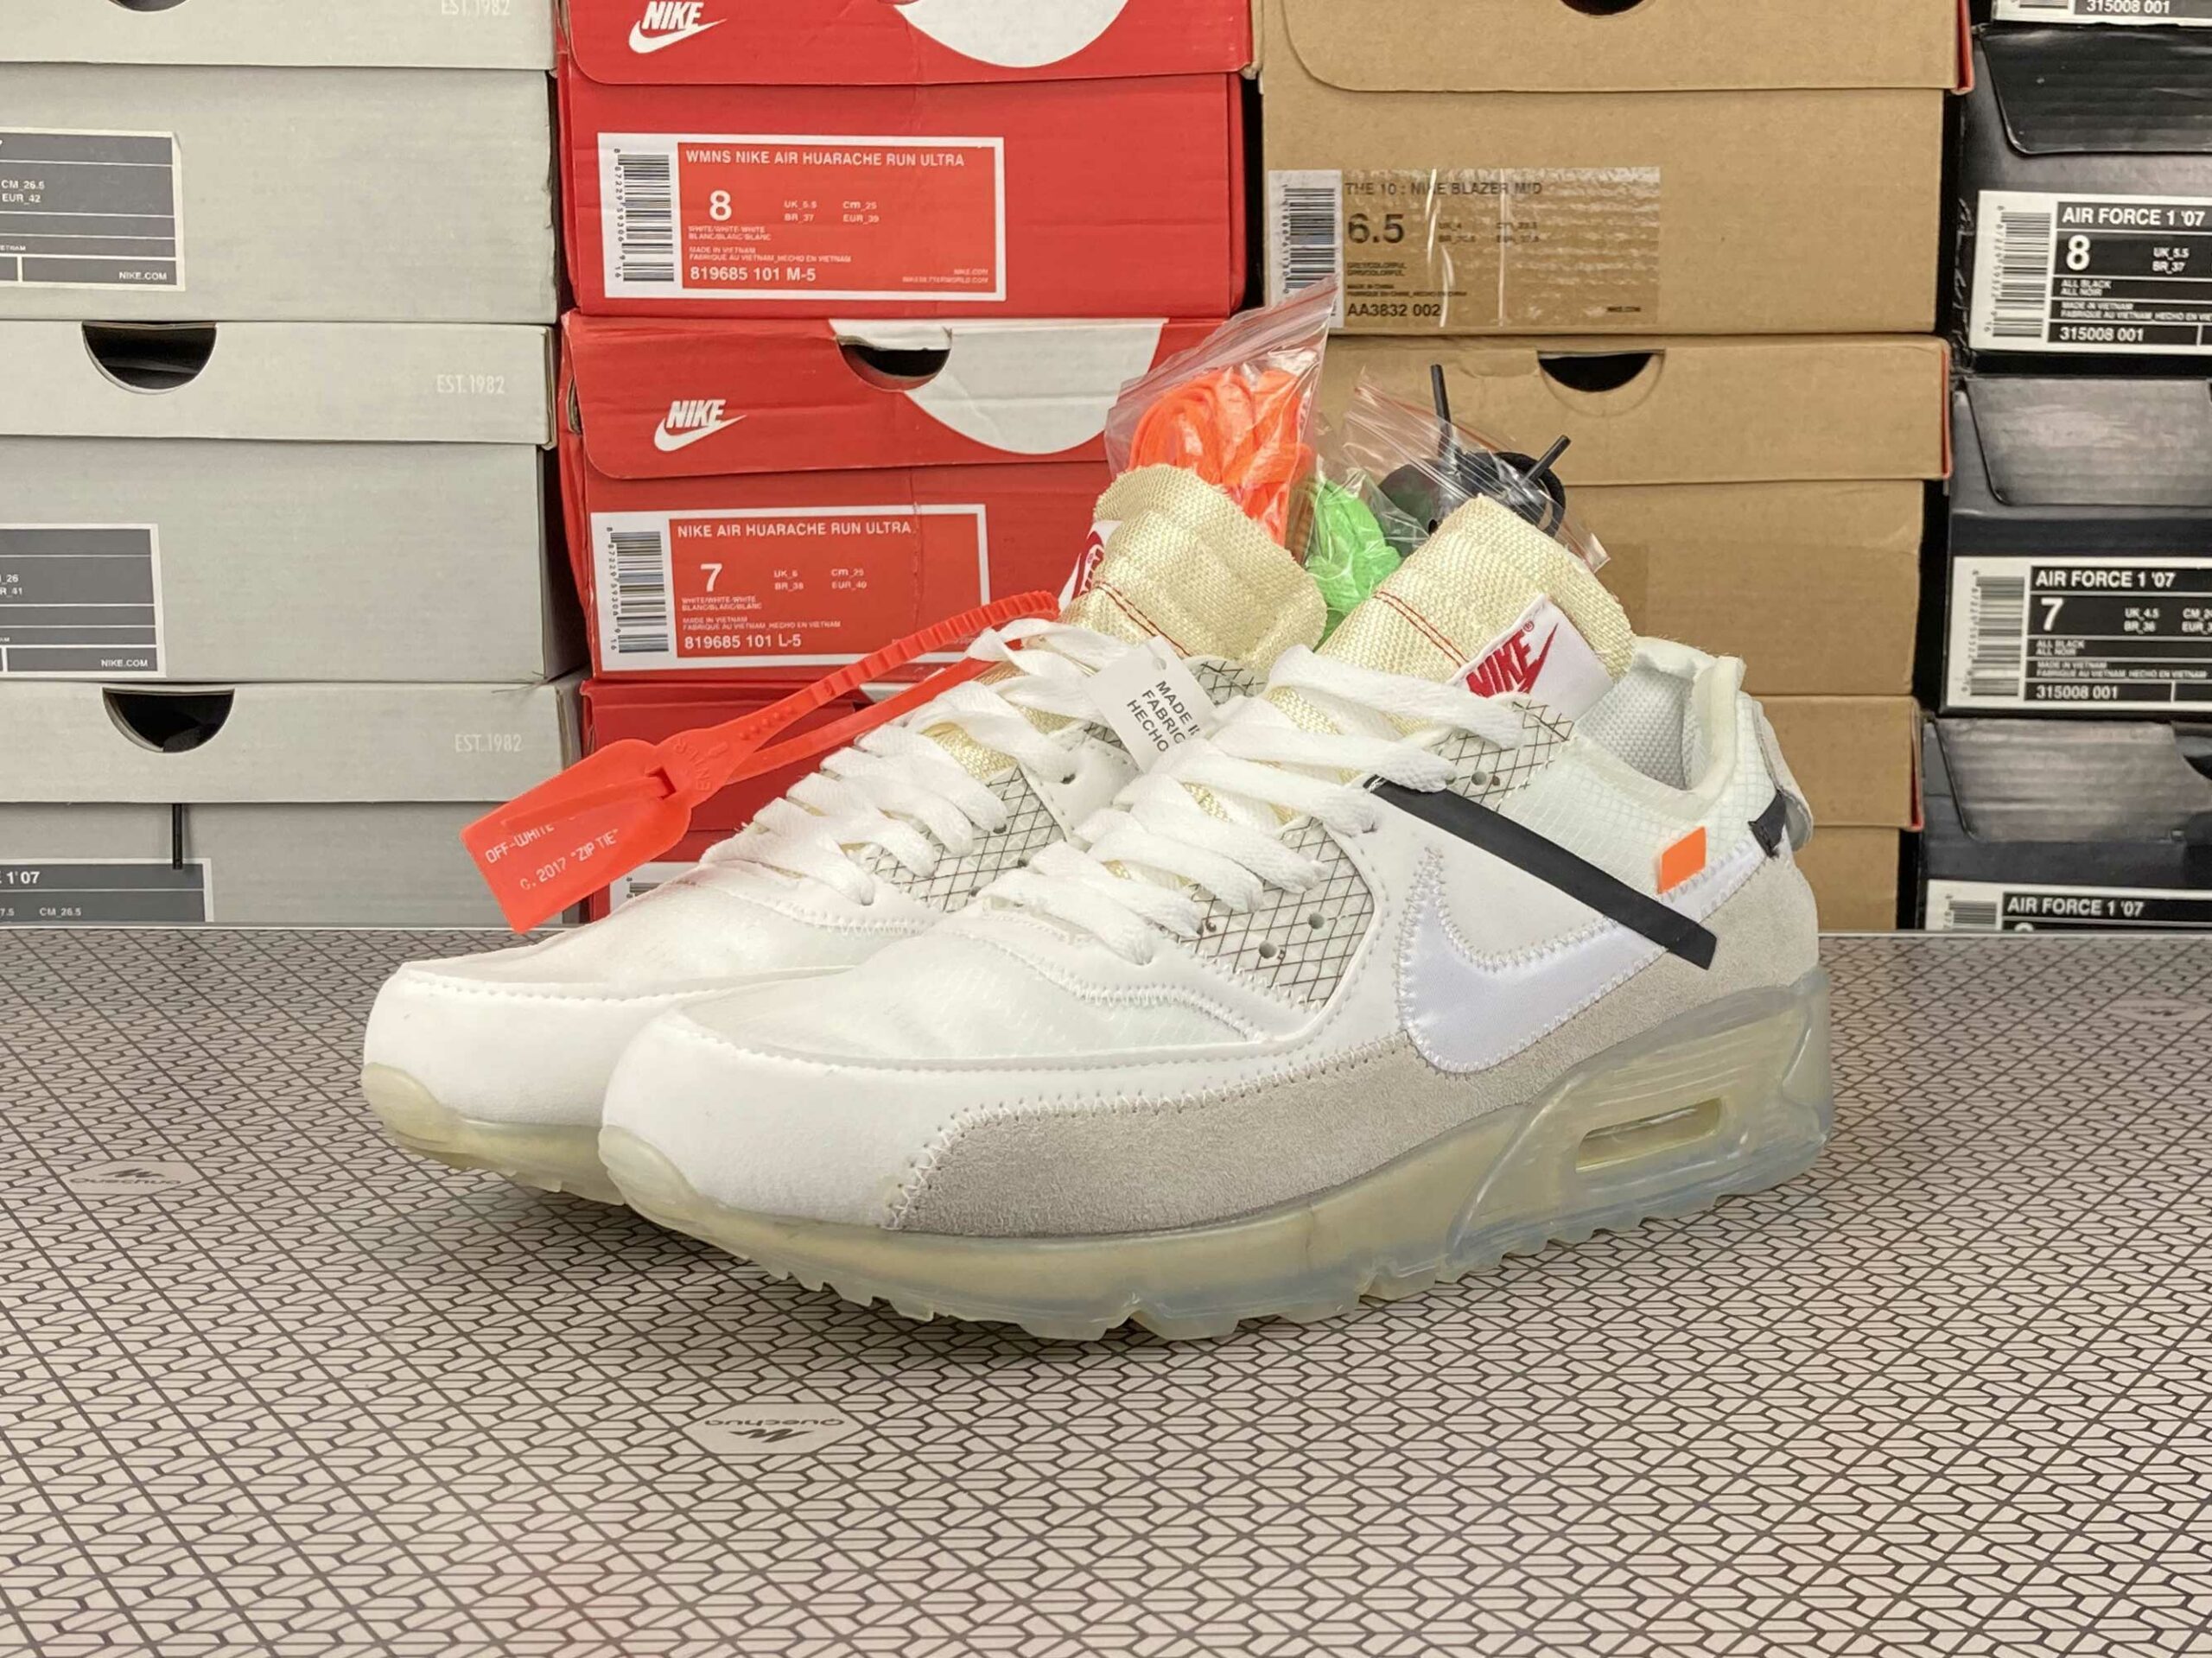 off white air max 90 size 12